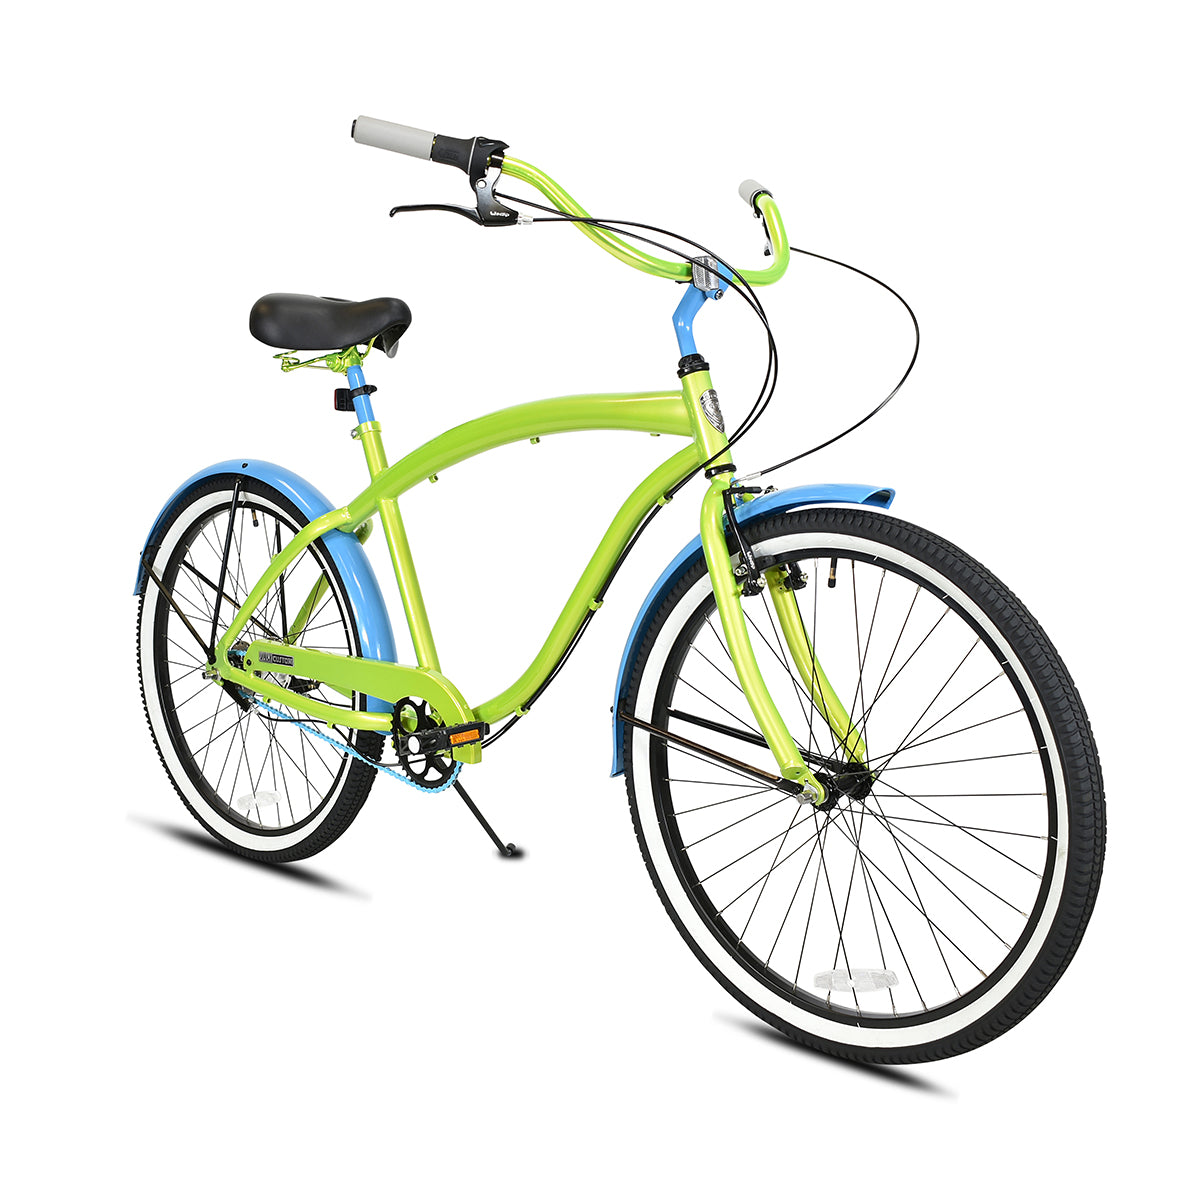 Jerry 3-Speed Cruiser Electric Lime Step-Over Frame and Handlebar with Sky Blue Fenders, Chain, and Posts and Black Tires, Shifters, Saddle, and Hand Brakes with White Wheels